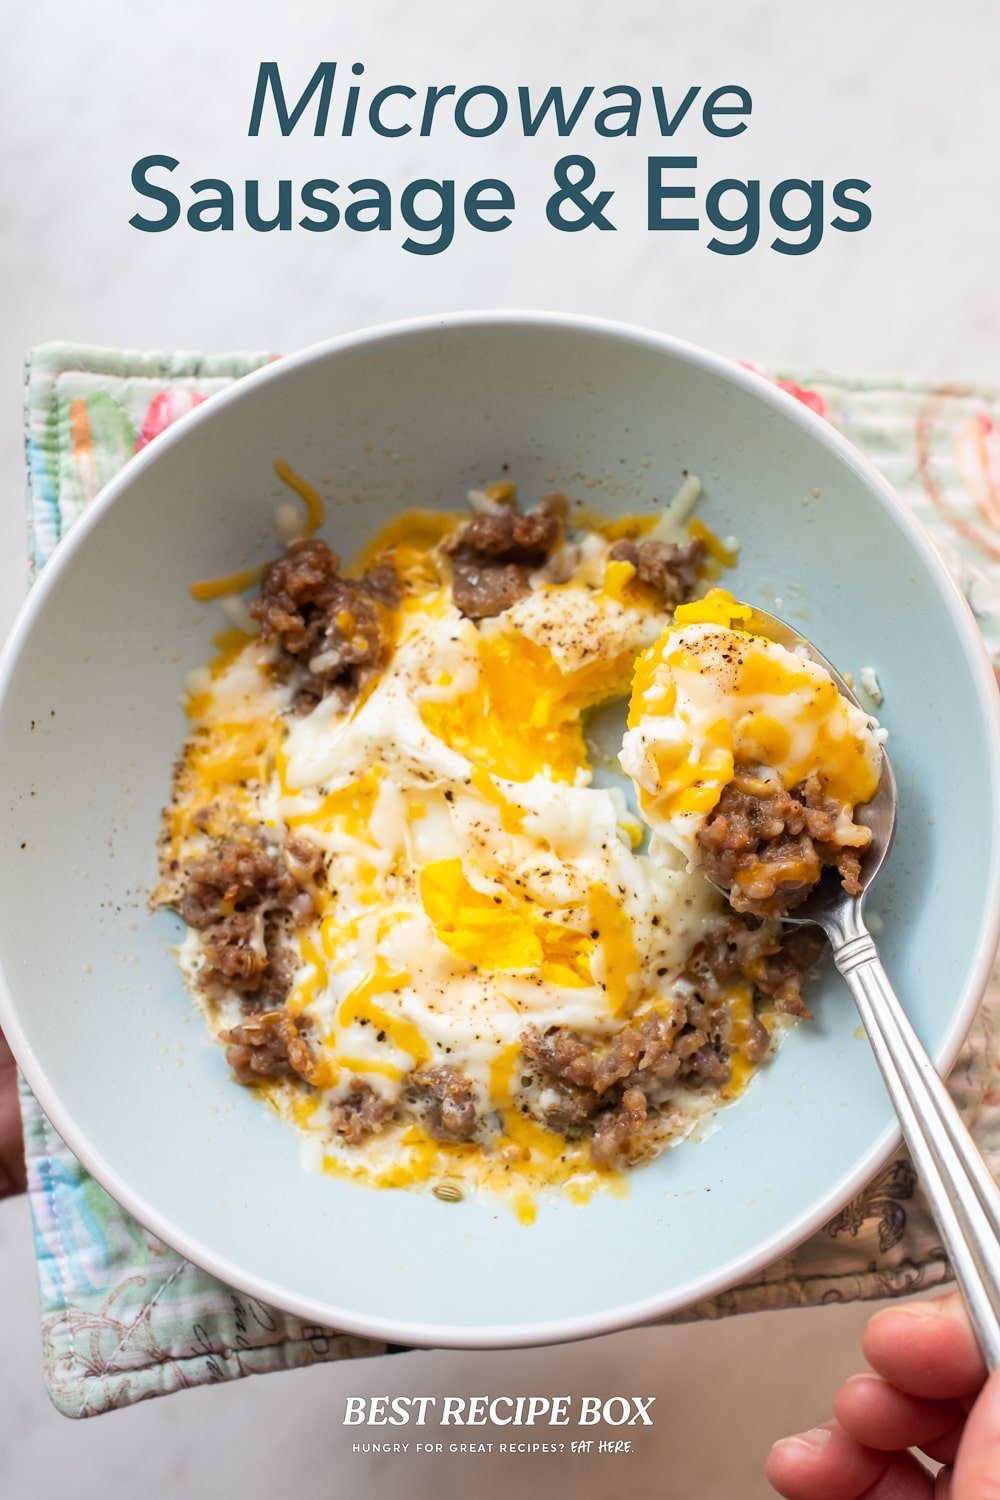 Microwave Sausage and Eggs Recipe 5 minutes KETO